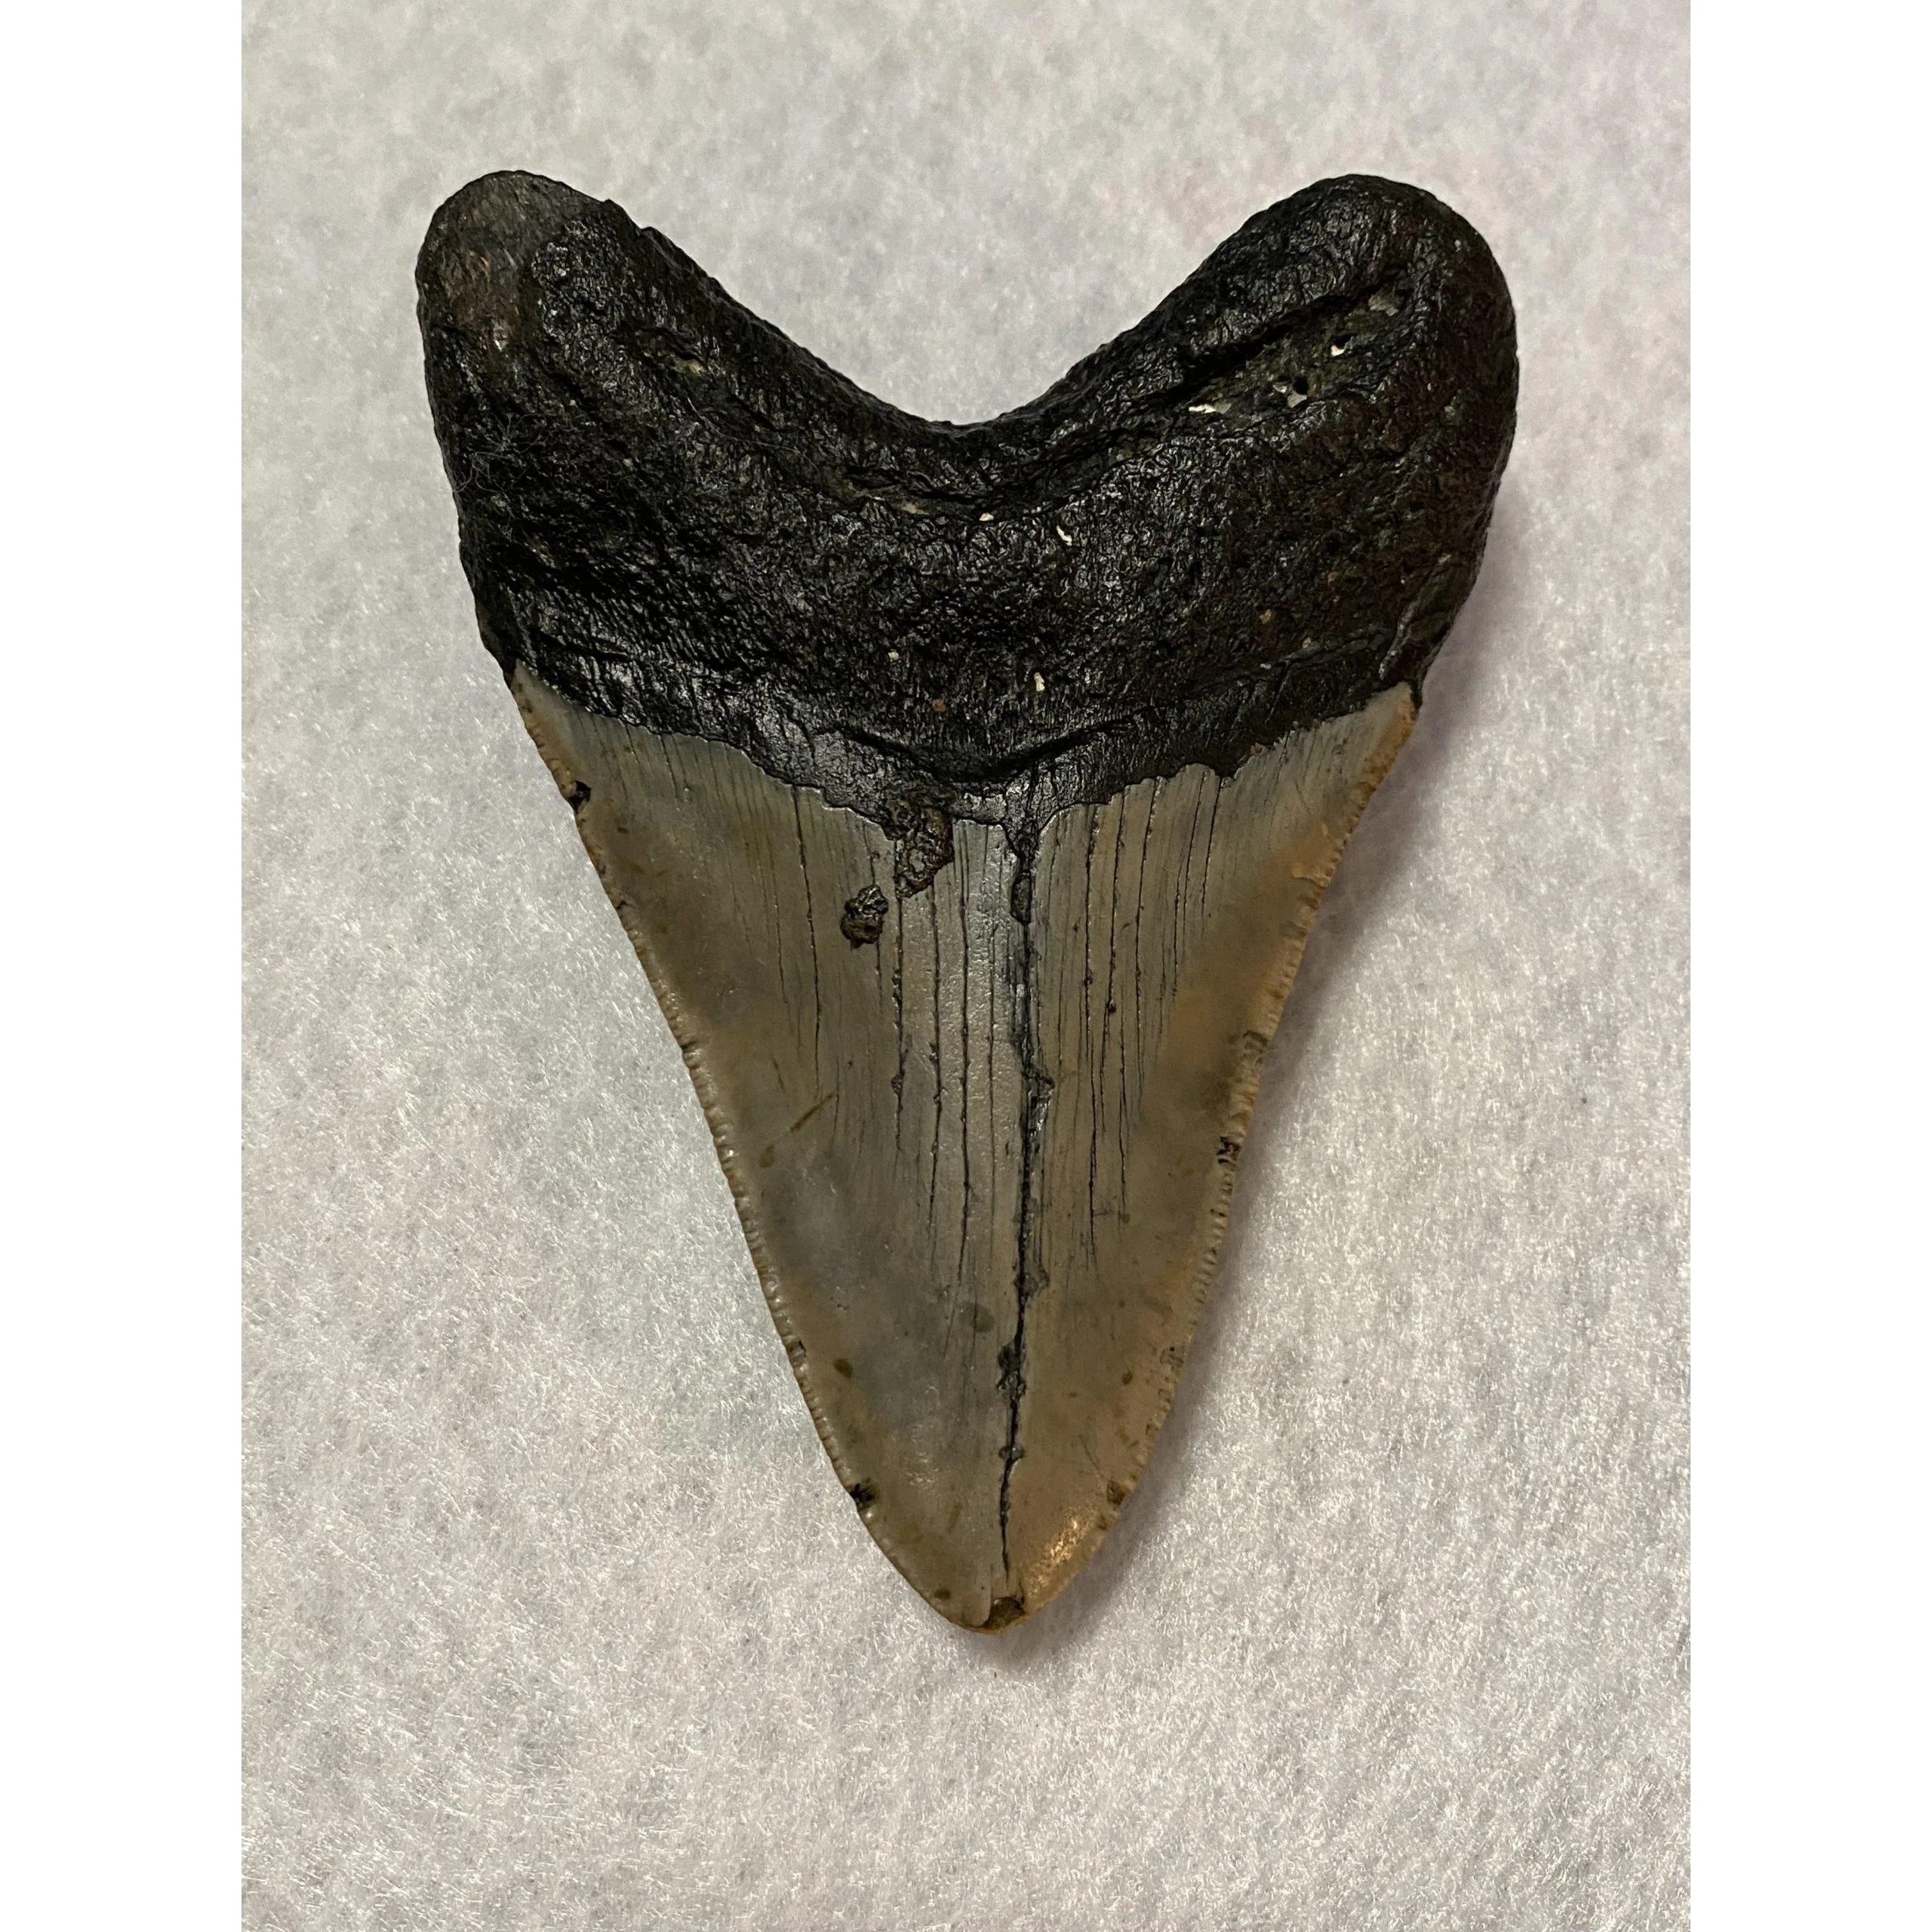 Megalodon Tooth South Carolina 4.56 inch Prehistoric Online